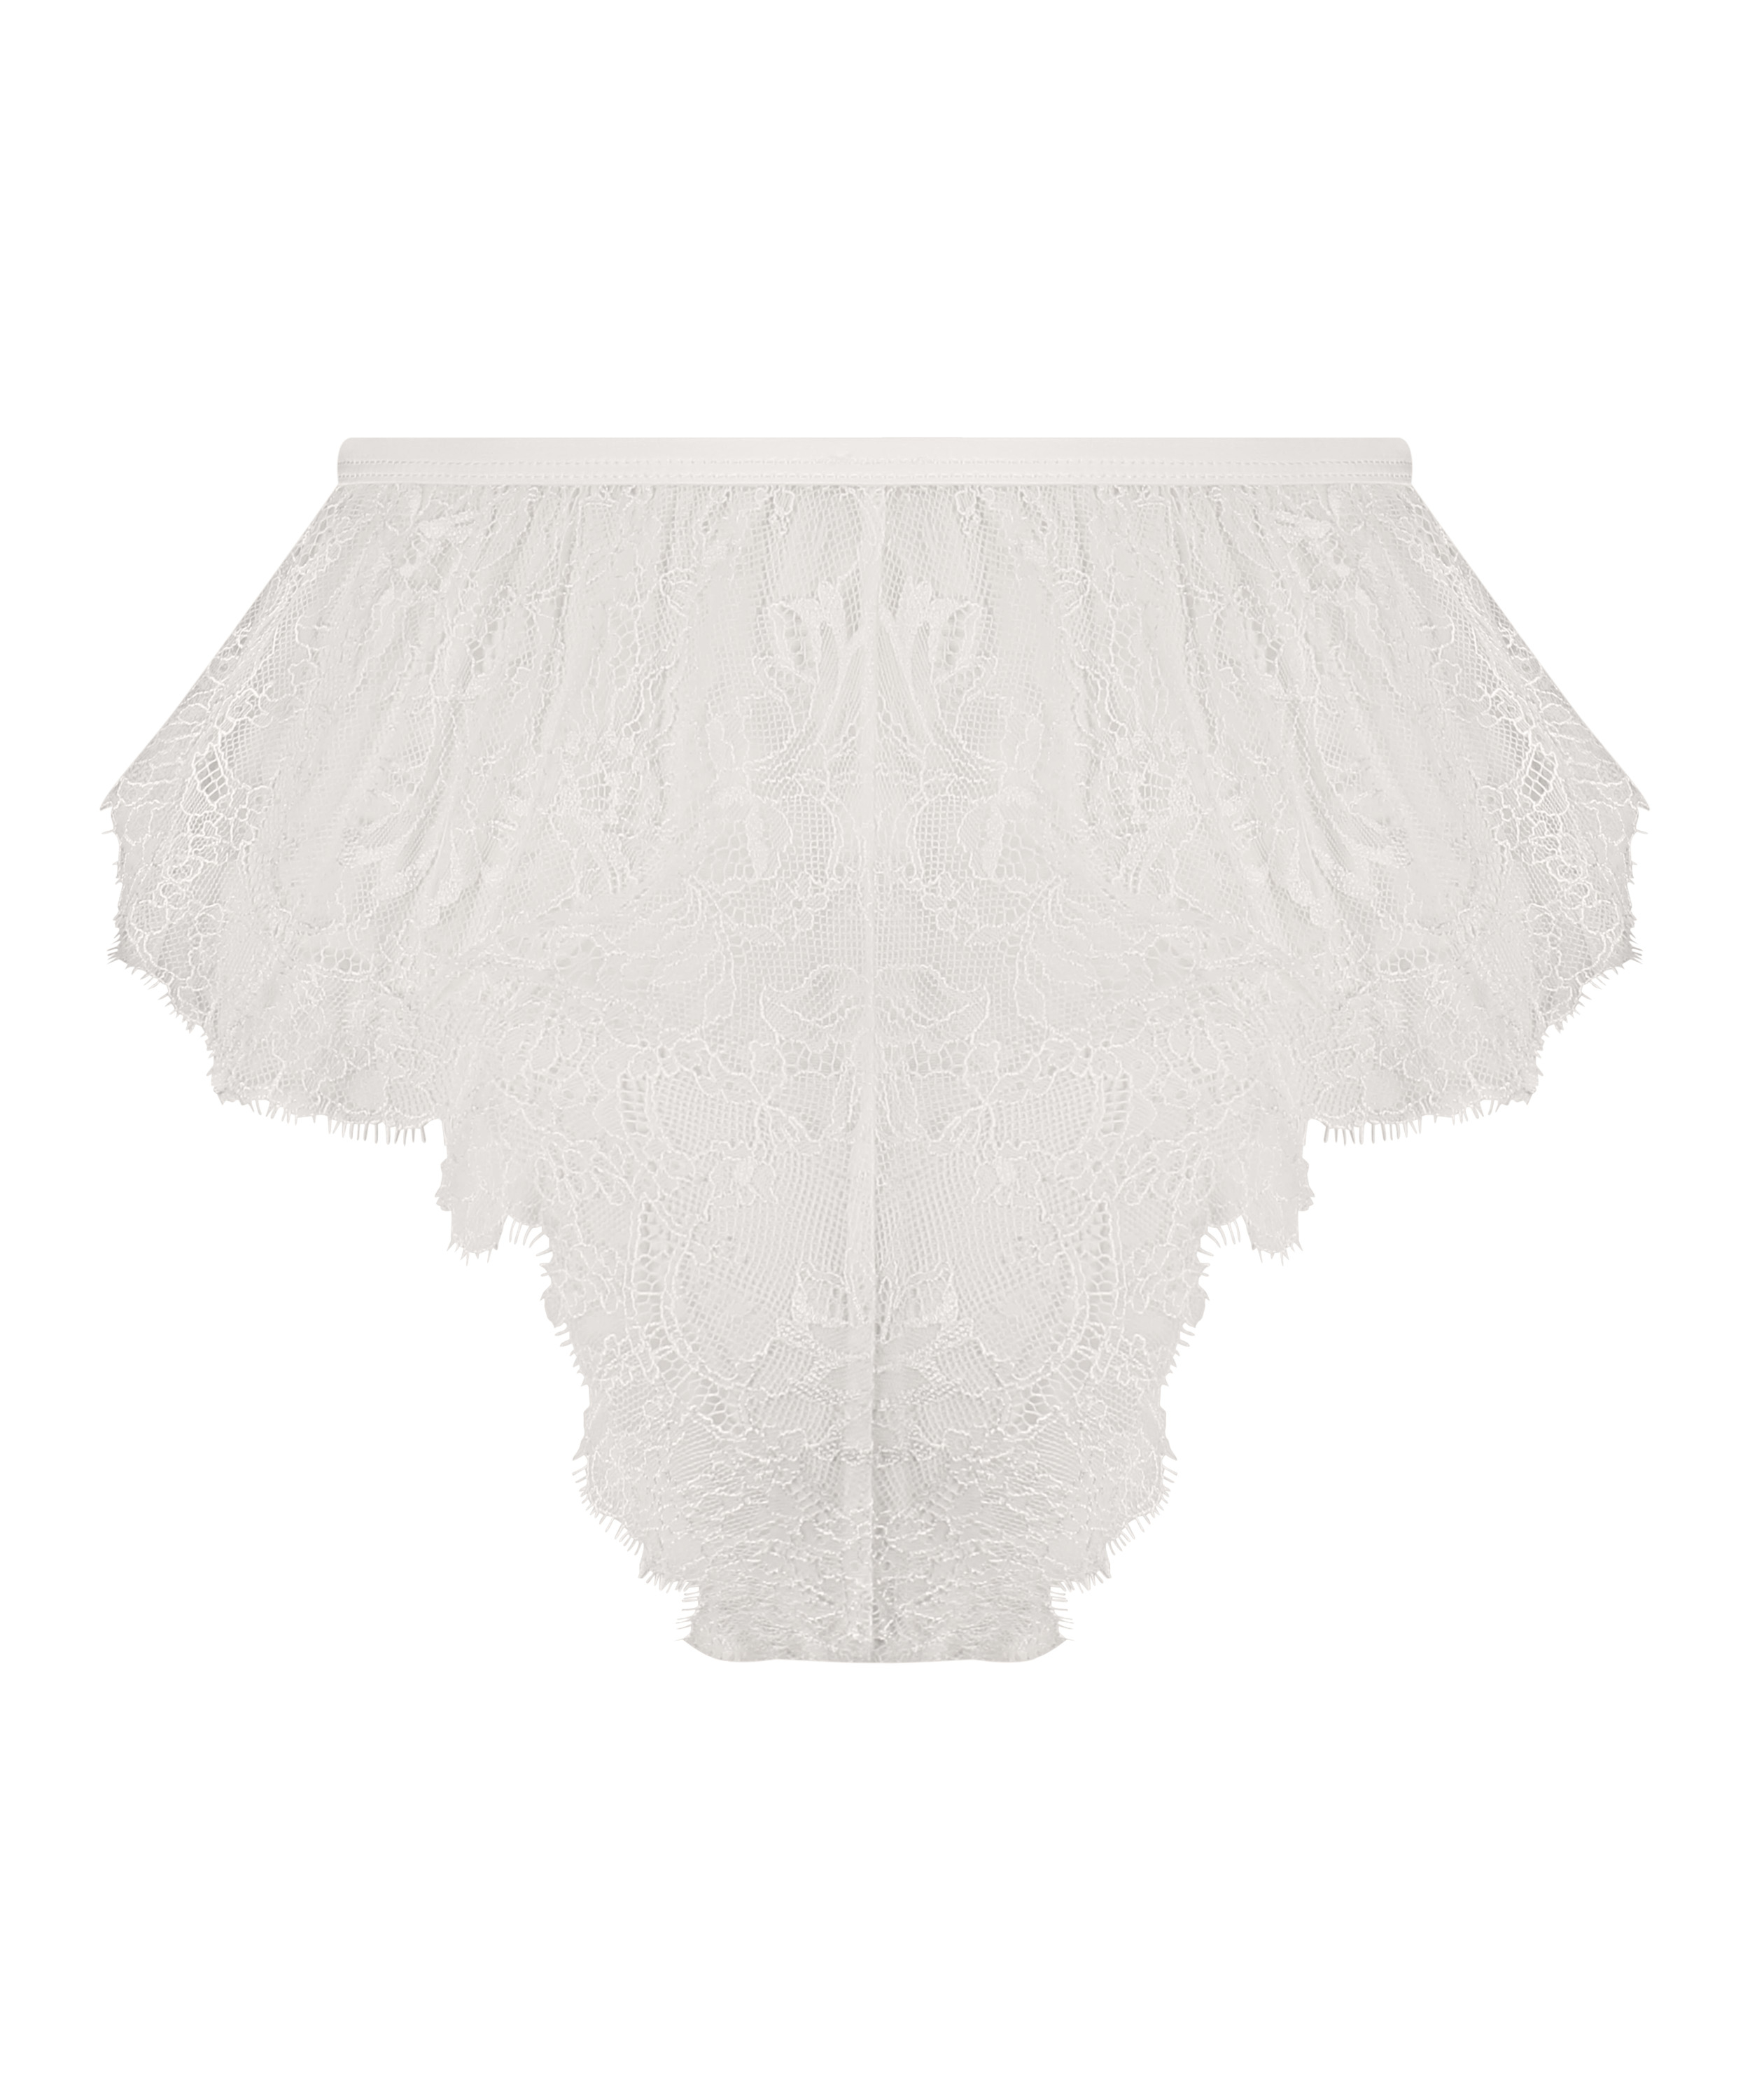 Lace Camille French Knicker, White, main